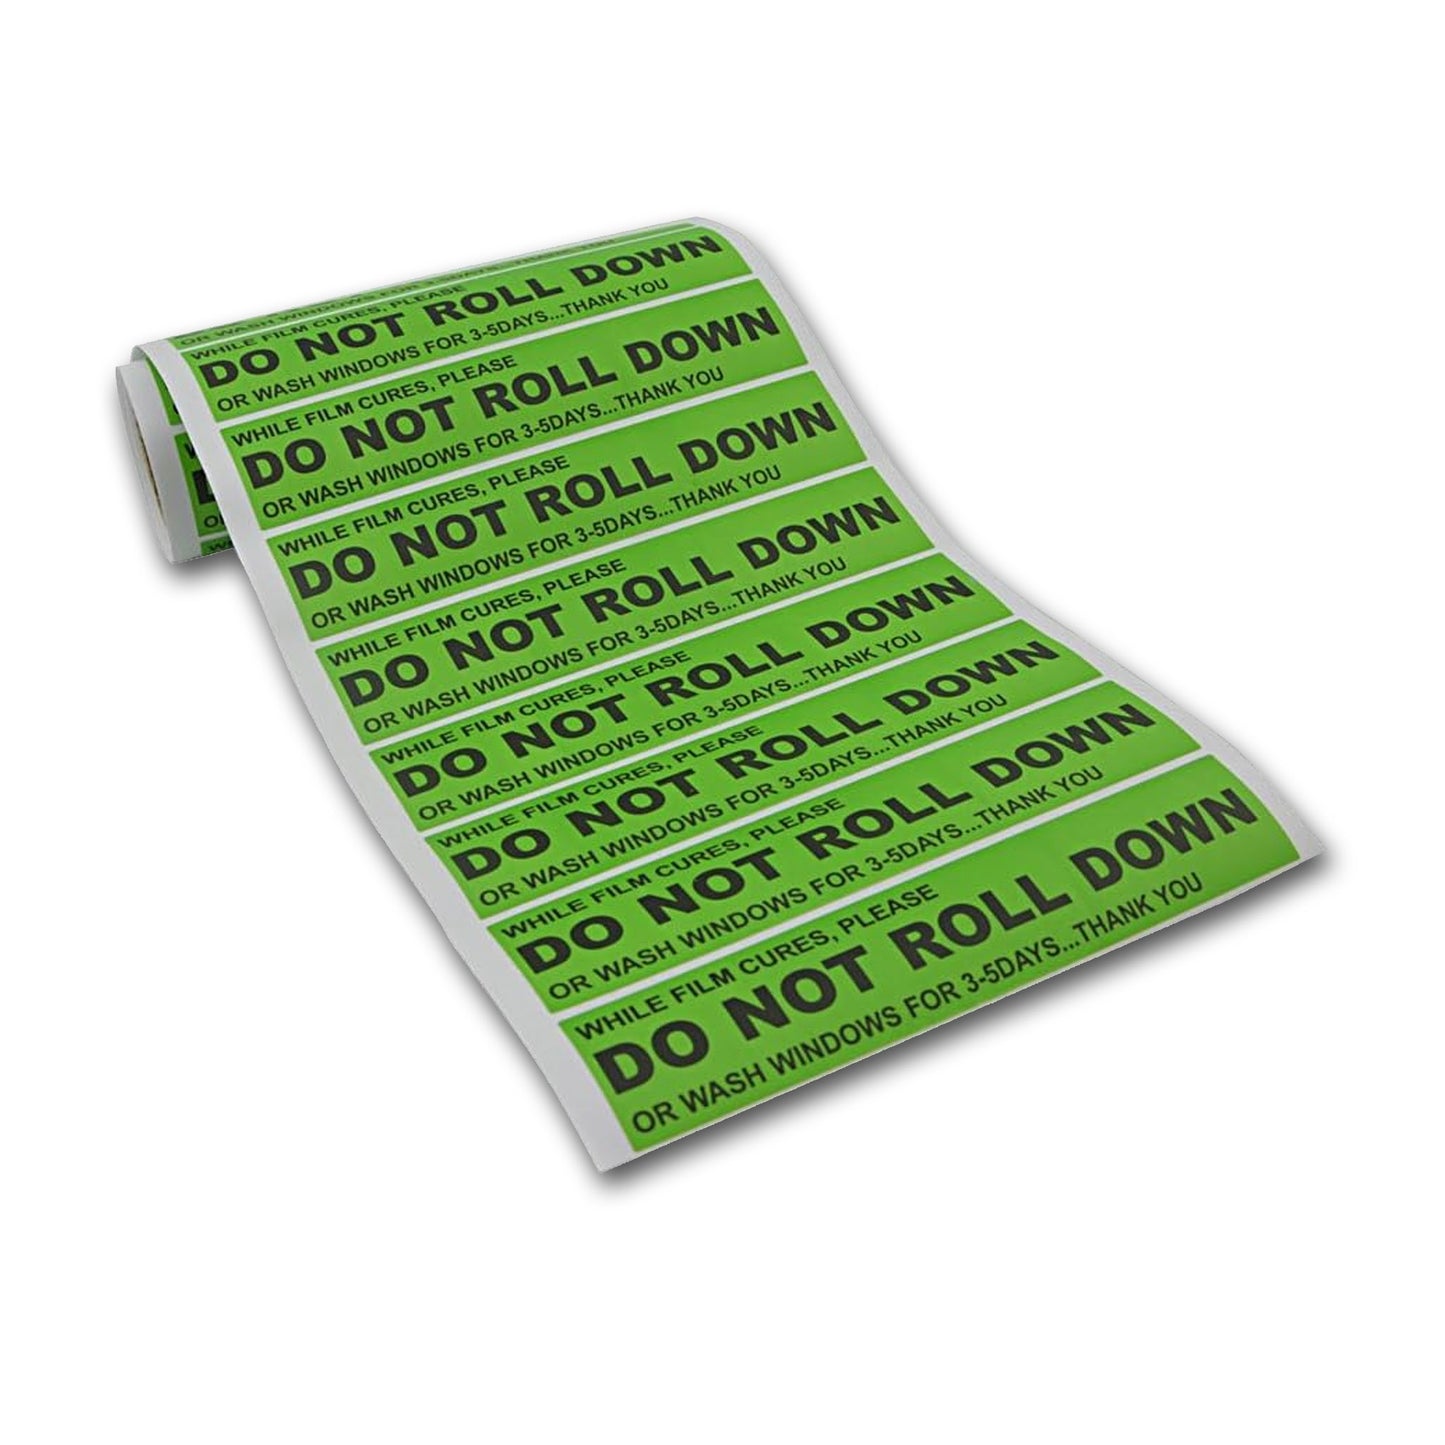 "Do Not Roll Down" Stickers